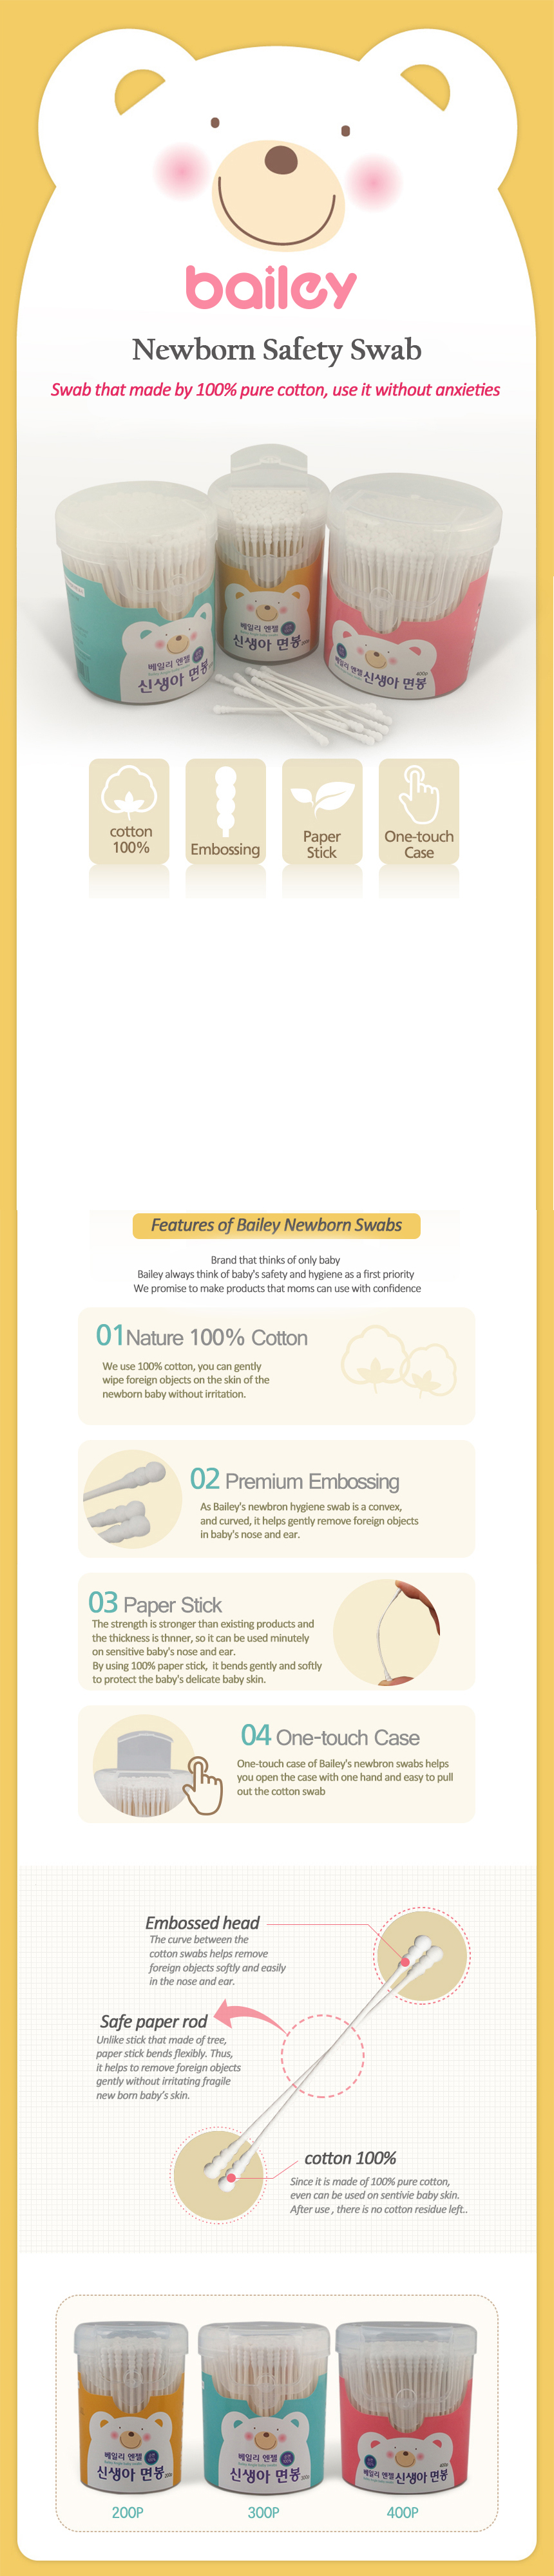 Bailey Newborn Baby 100% Cotton Swabs does not irritate the skin because the stick is made of paper.